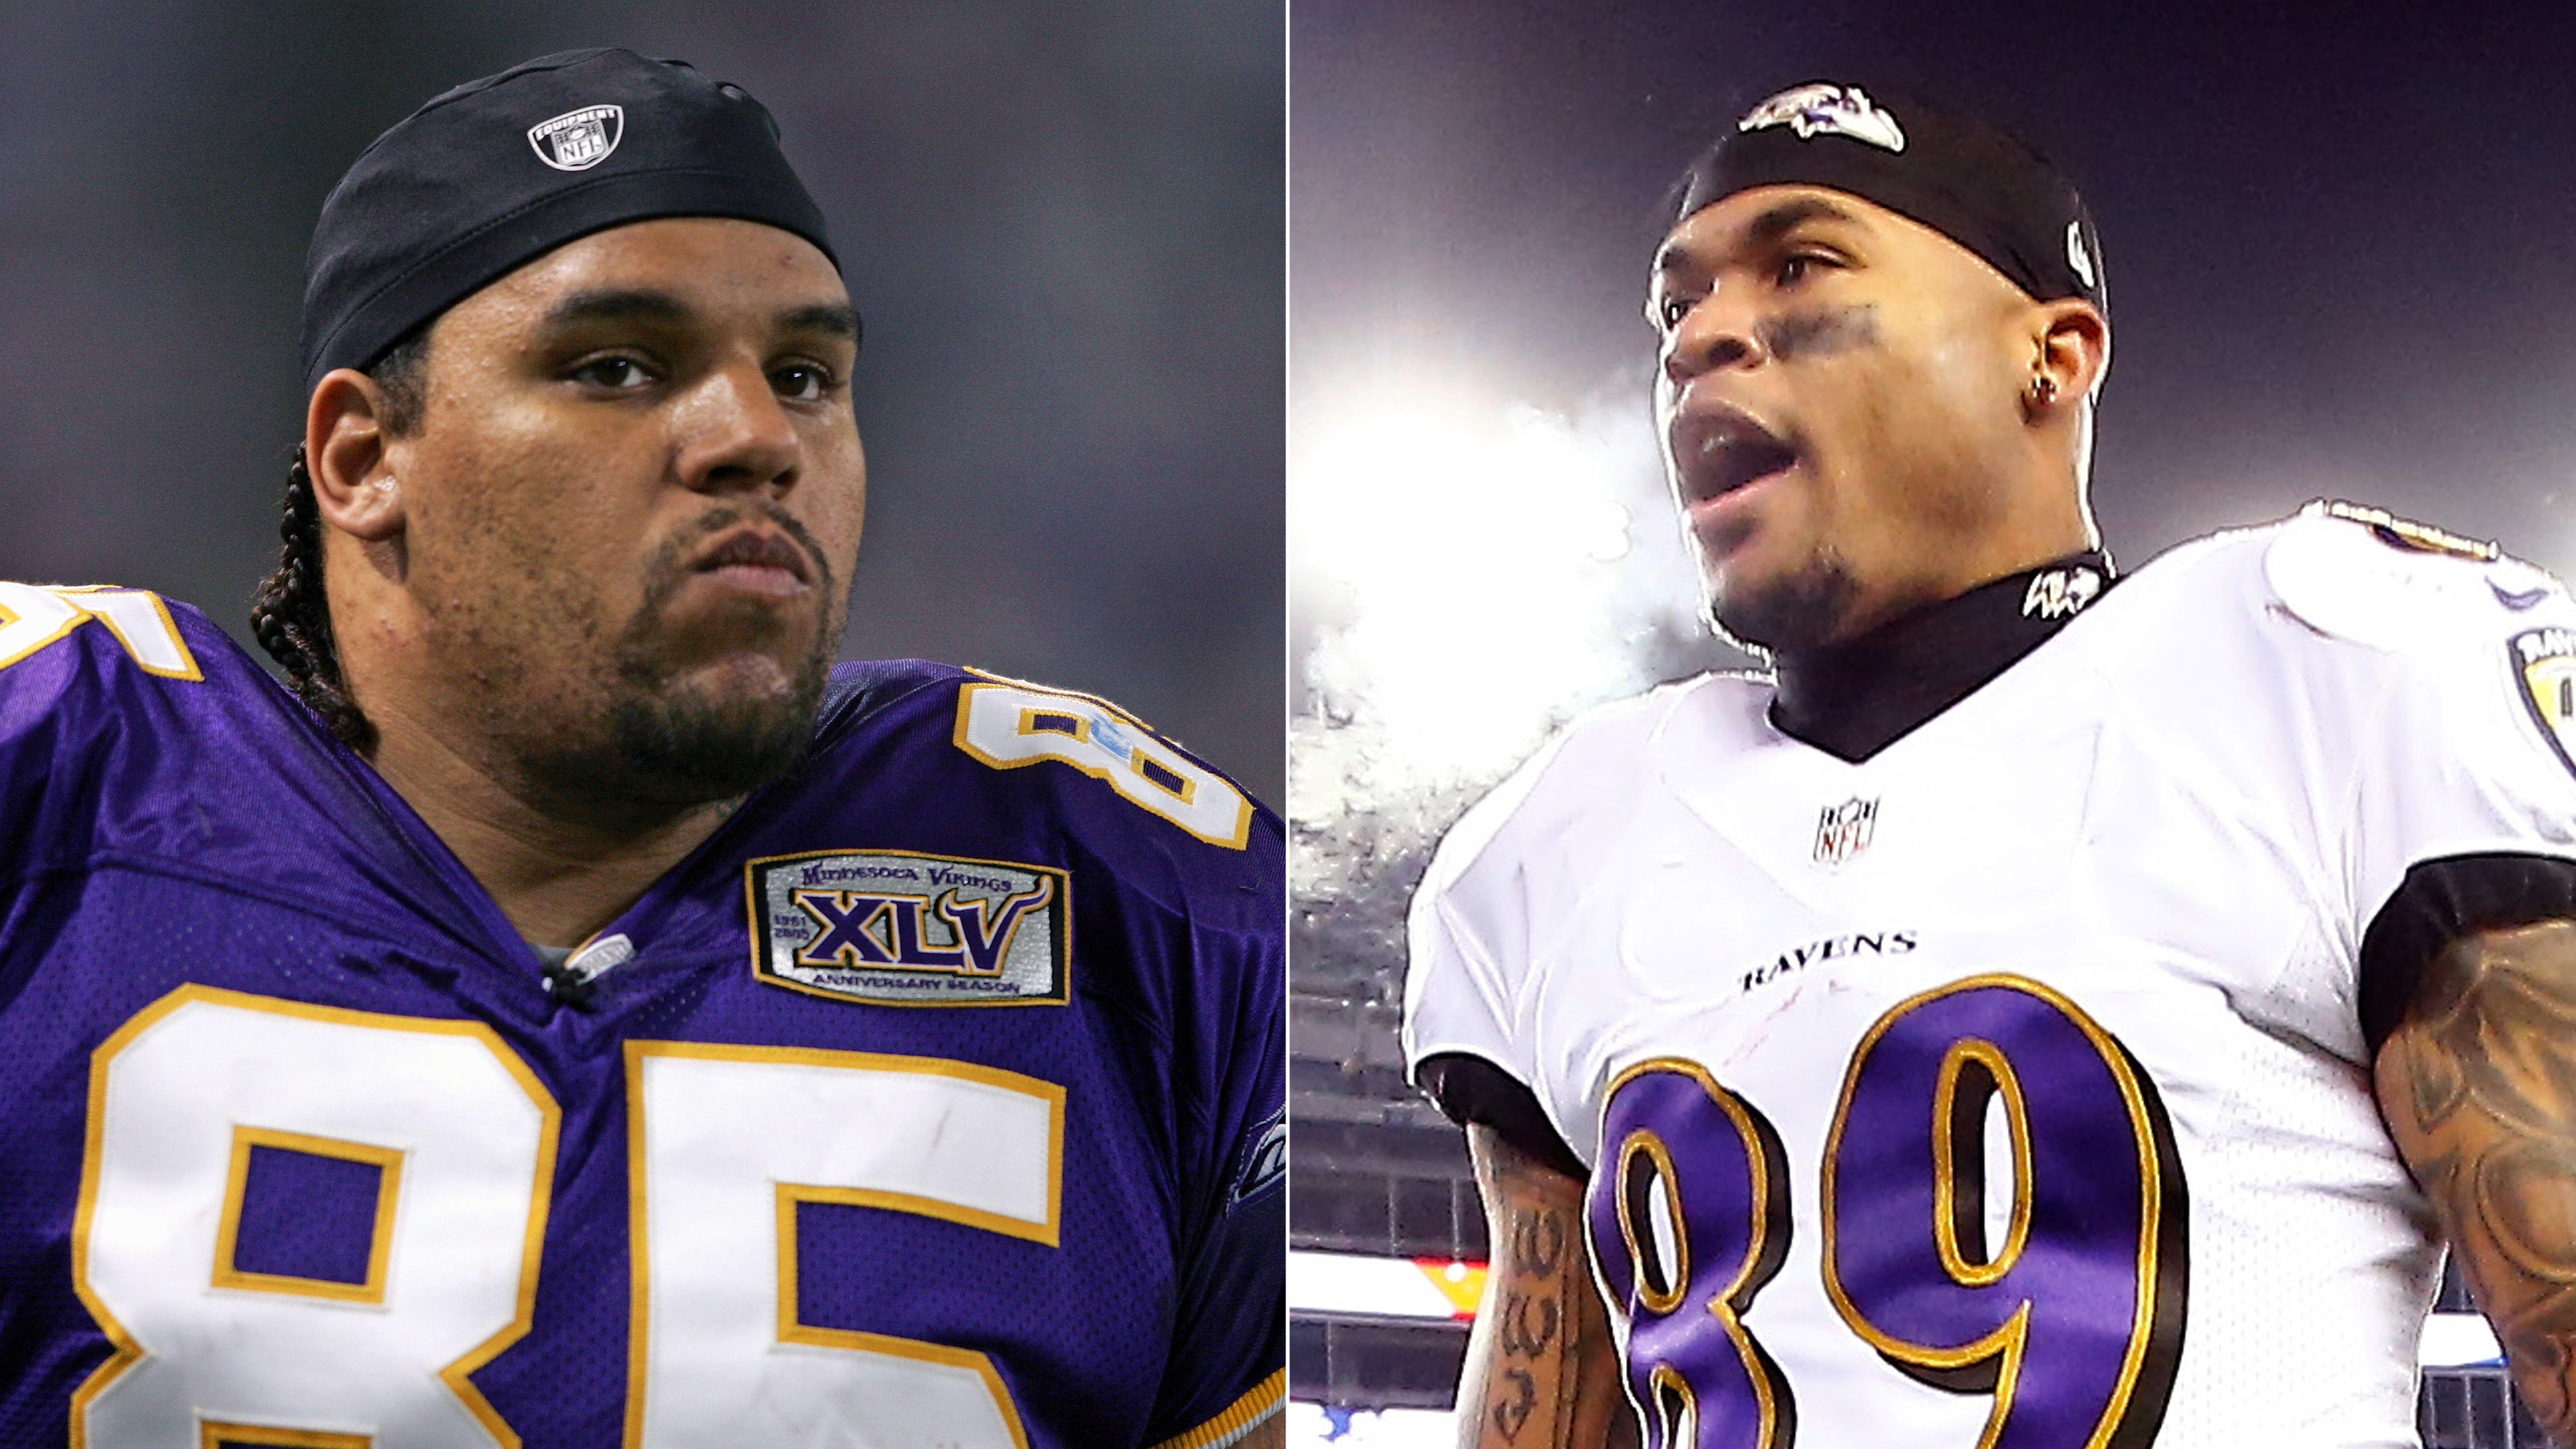 Jermaine Wiggins in November 2005, Steve Smith in January 2015 (Photos by Elsa Jared Wickerham/Getty Images)